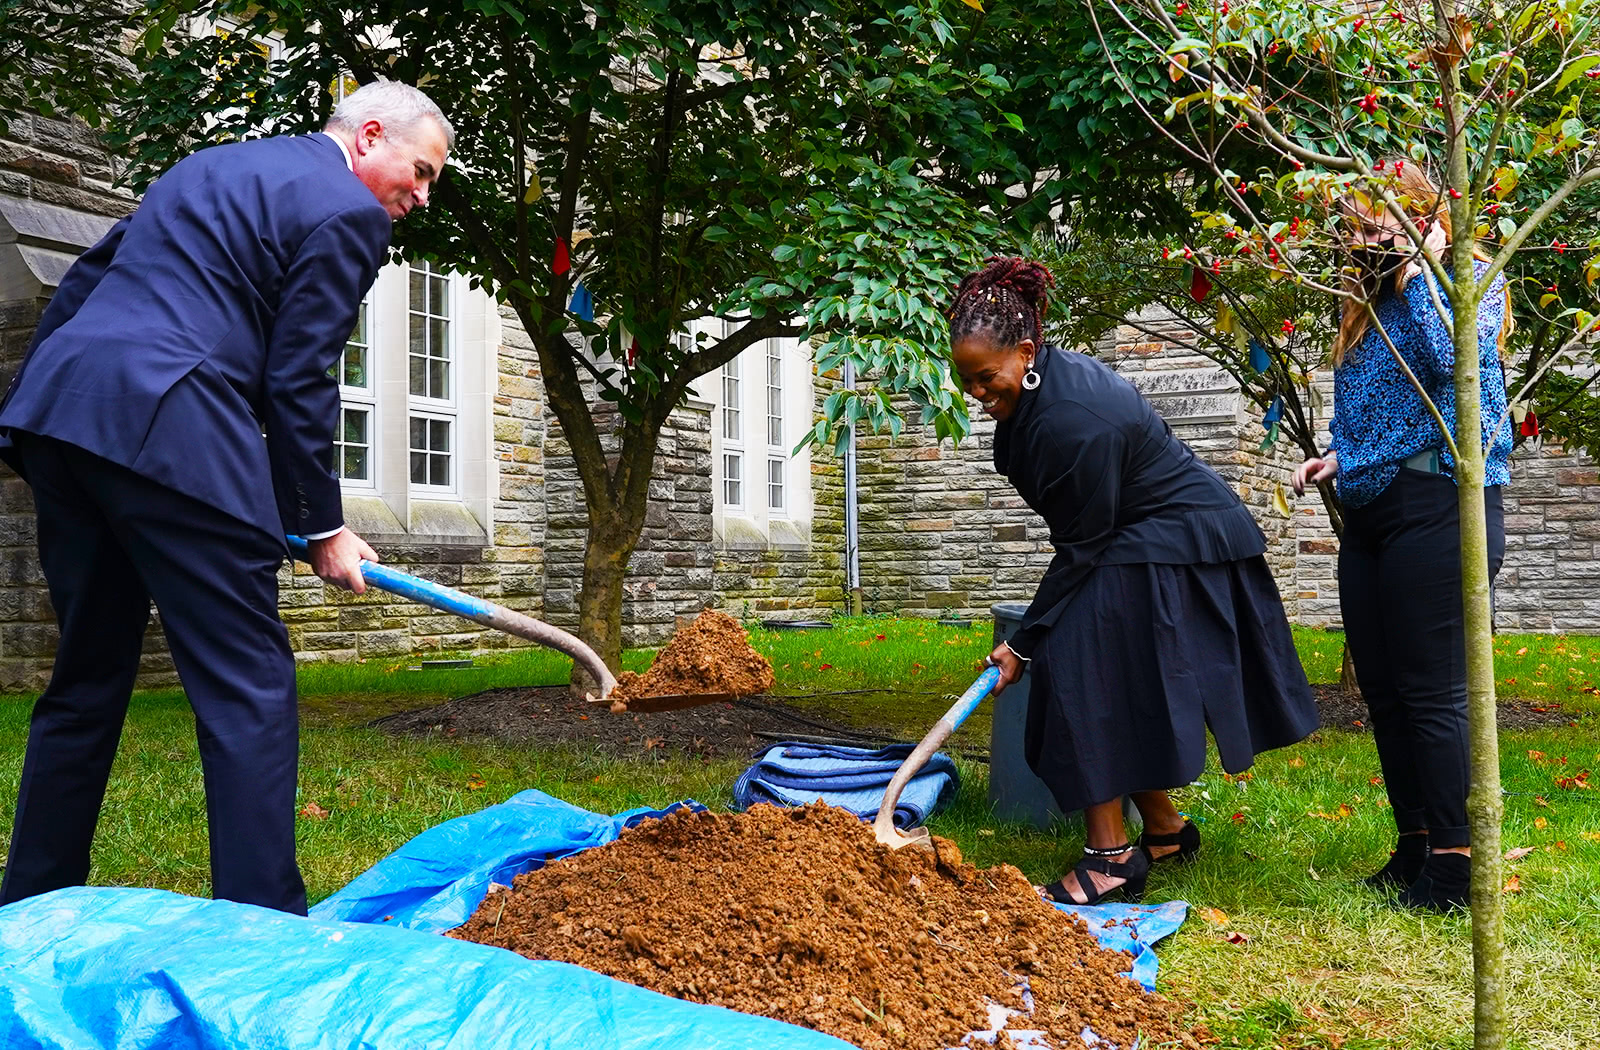 Terry Sawyer and Kaye Whitehead shovel dirt during a tree planting ceremony near the Fernandez Center